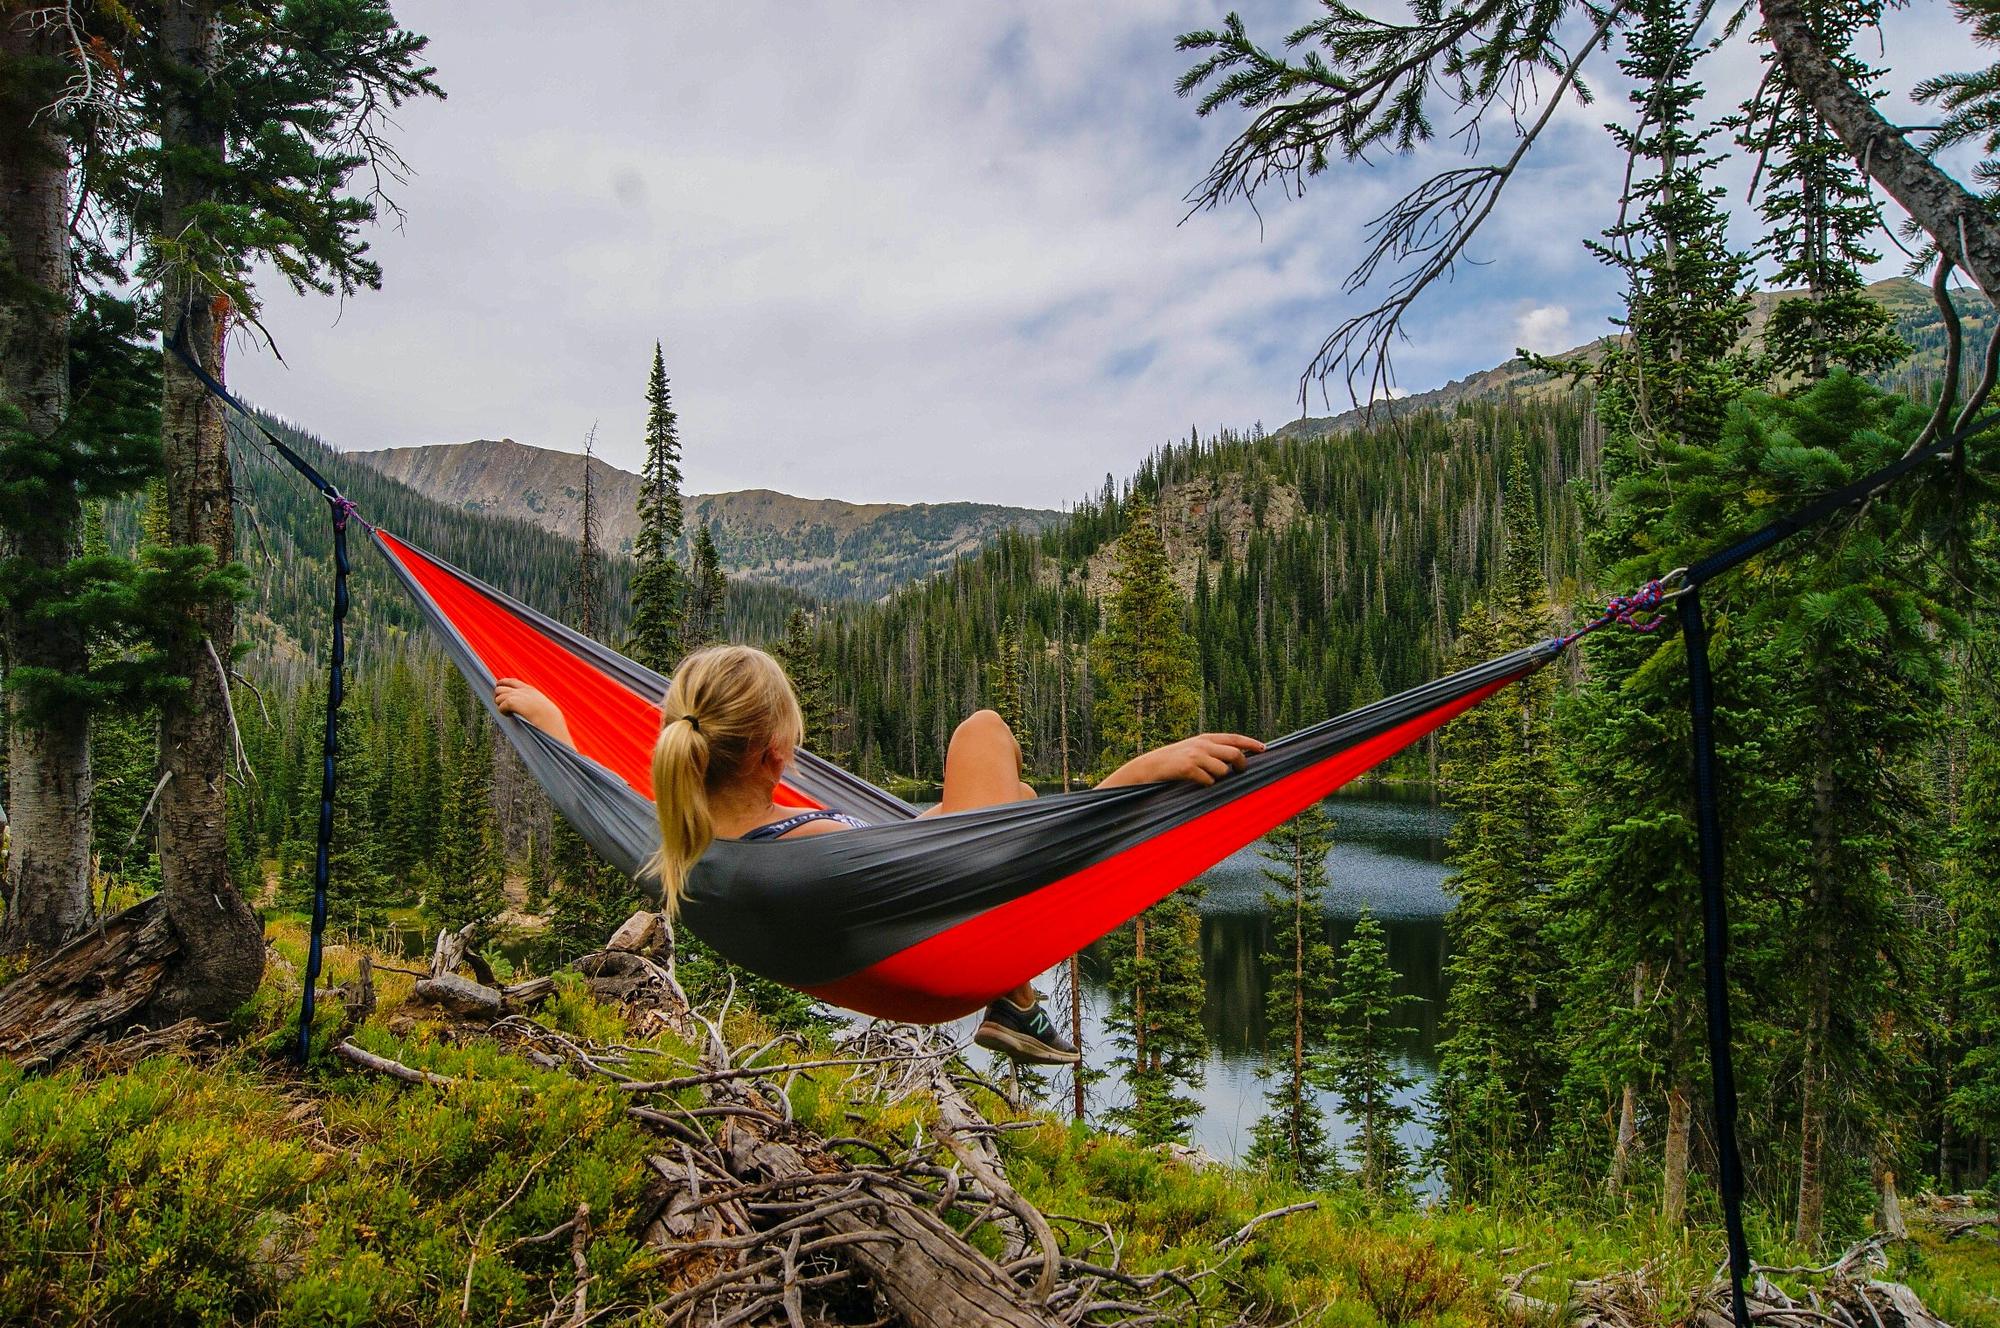 A young blonde woman with her back to us relaxes in a red hammock above a serene lake in a thickly wooded area. The valley is made up of thick tall trees - North Park, Jackson County Colorado